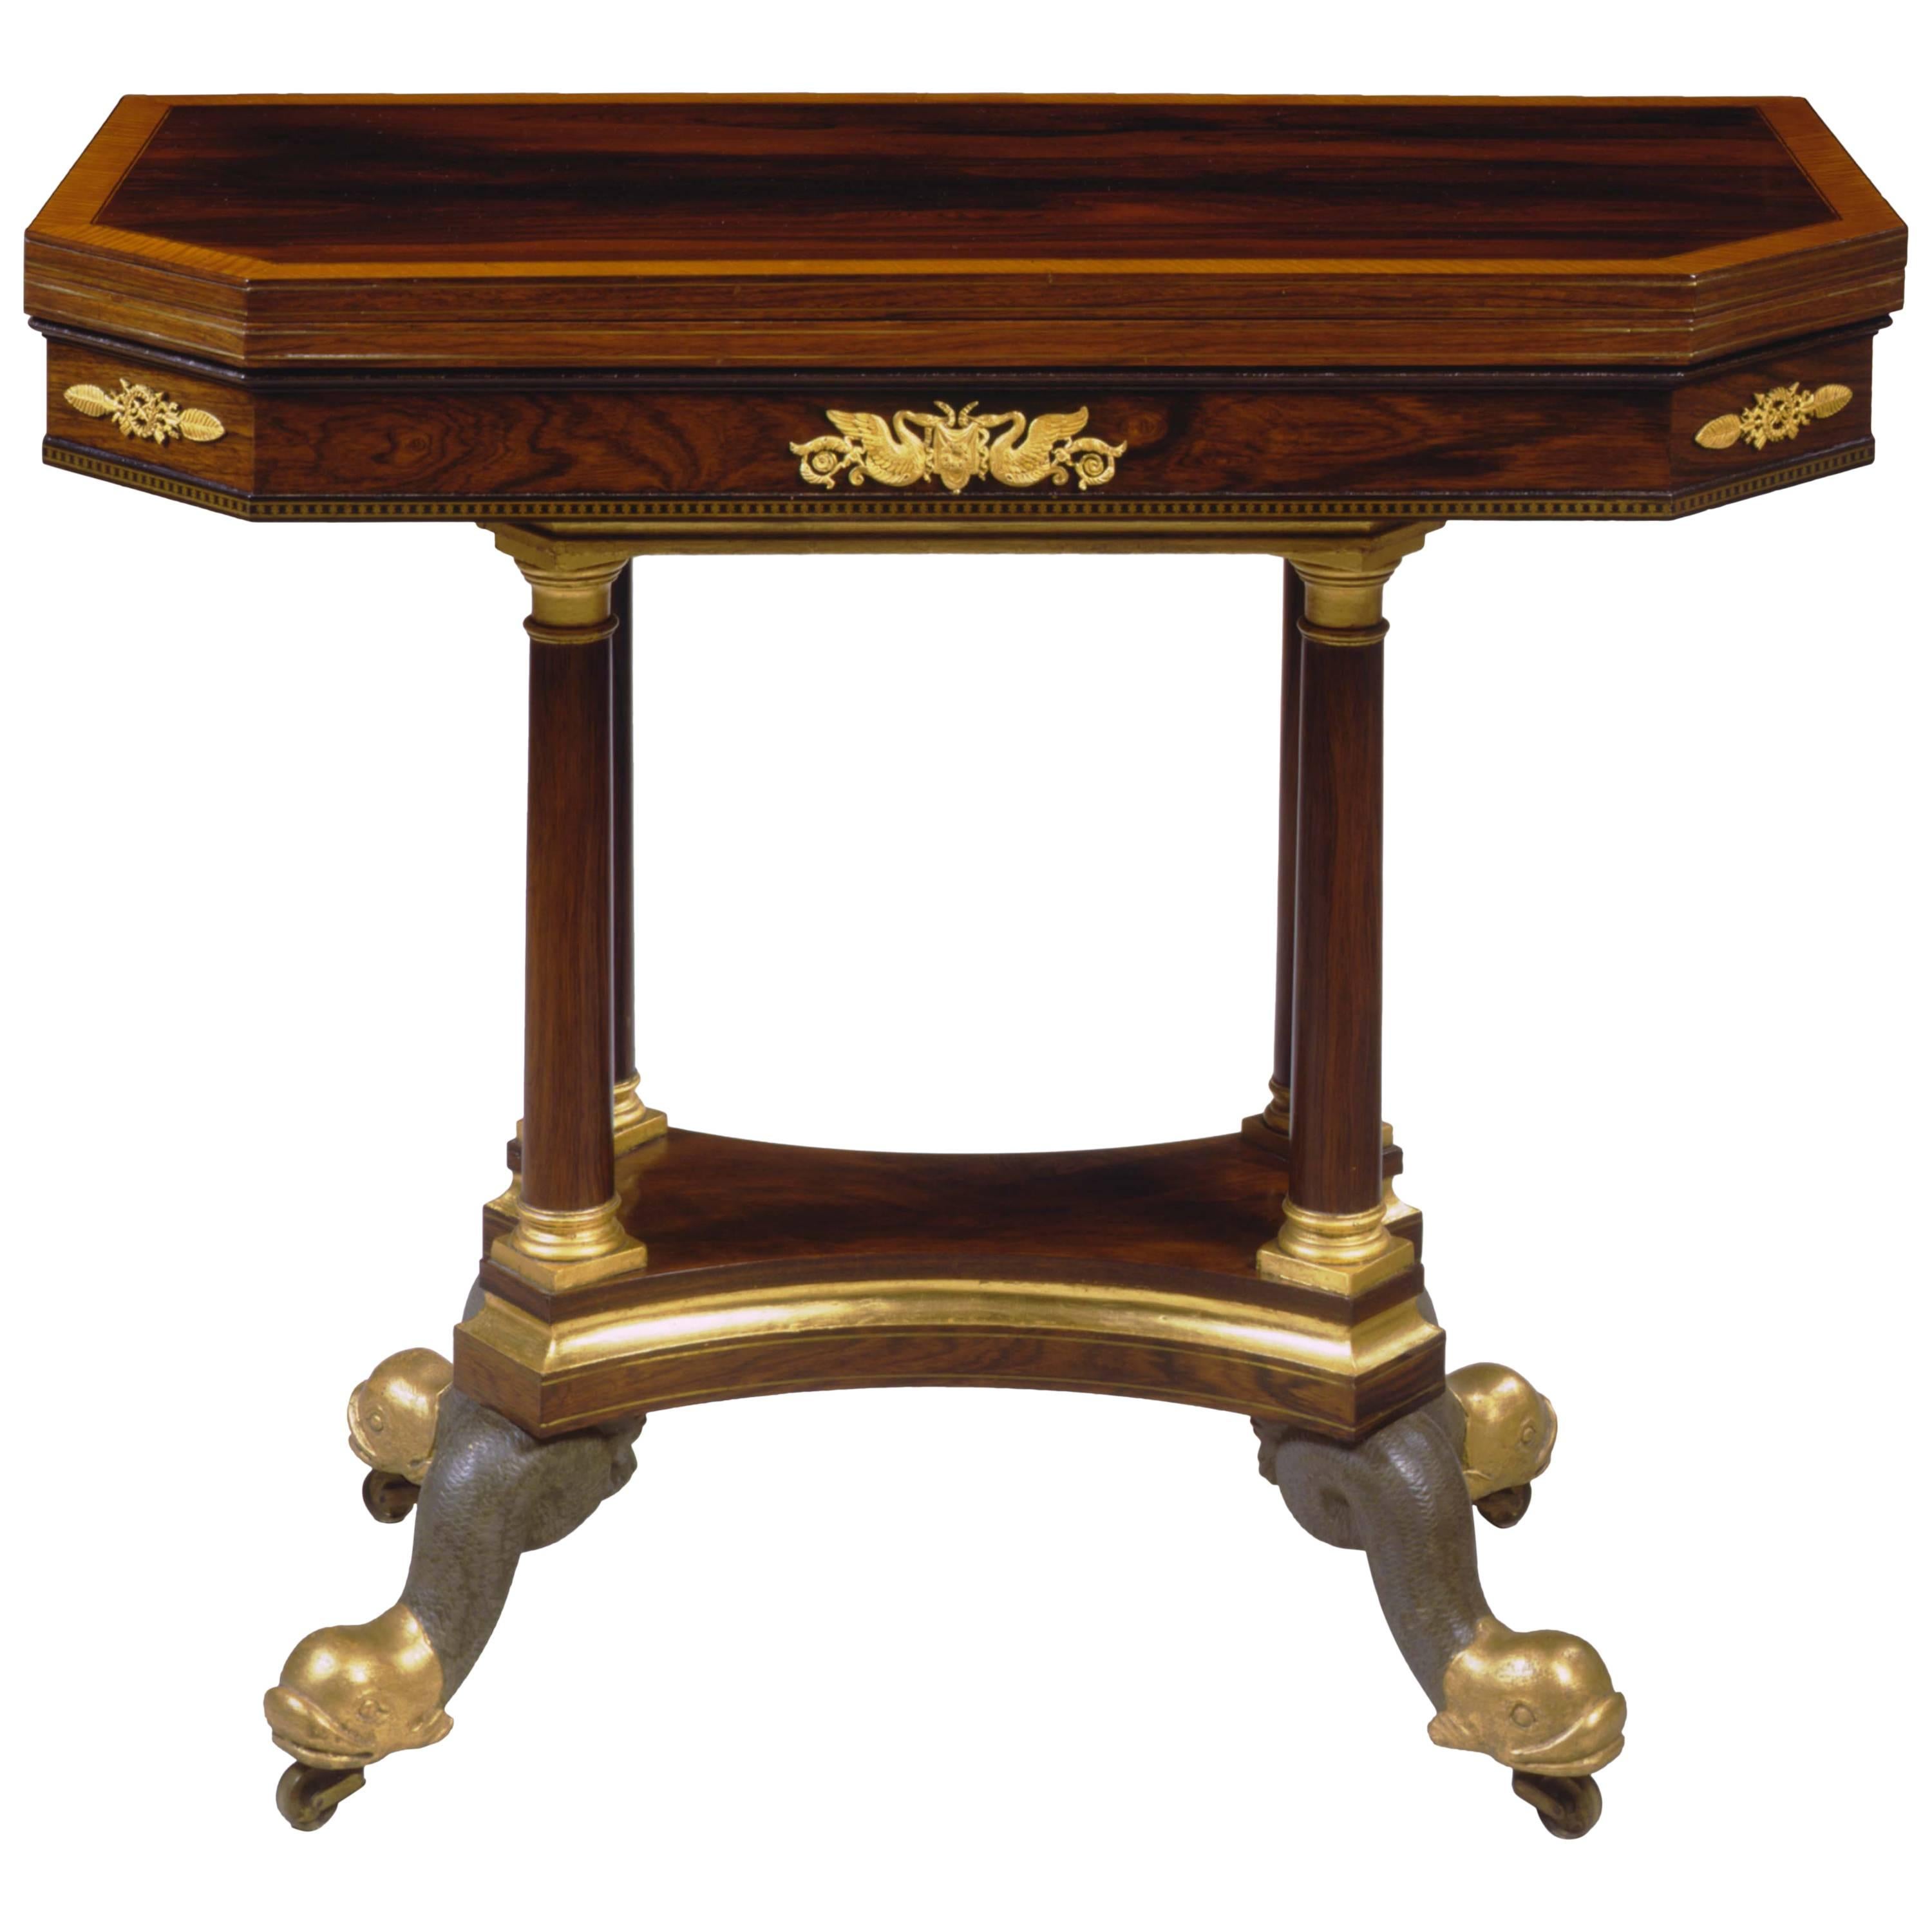 Very Fine Brass-Inlaid Gilt Bronze-Mounted Games Table by Duncan Phyfe For Sale